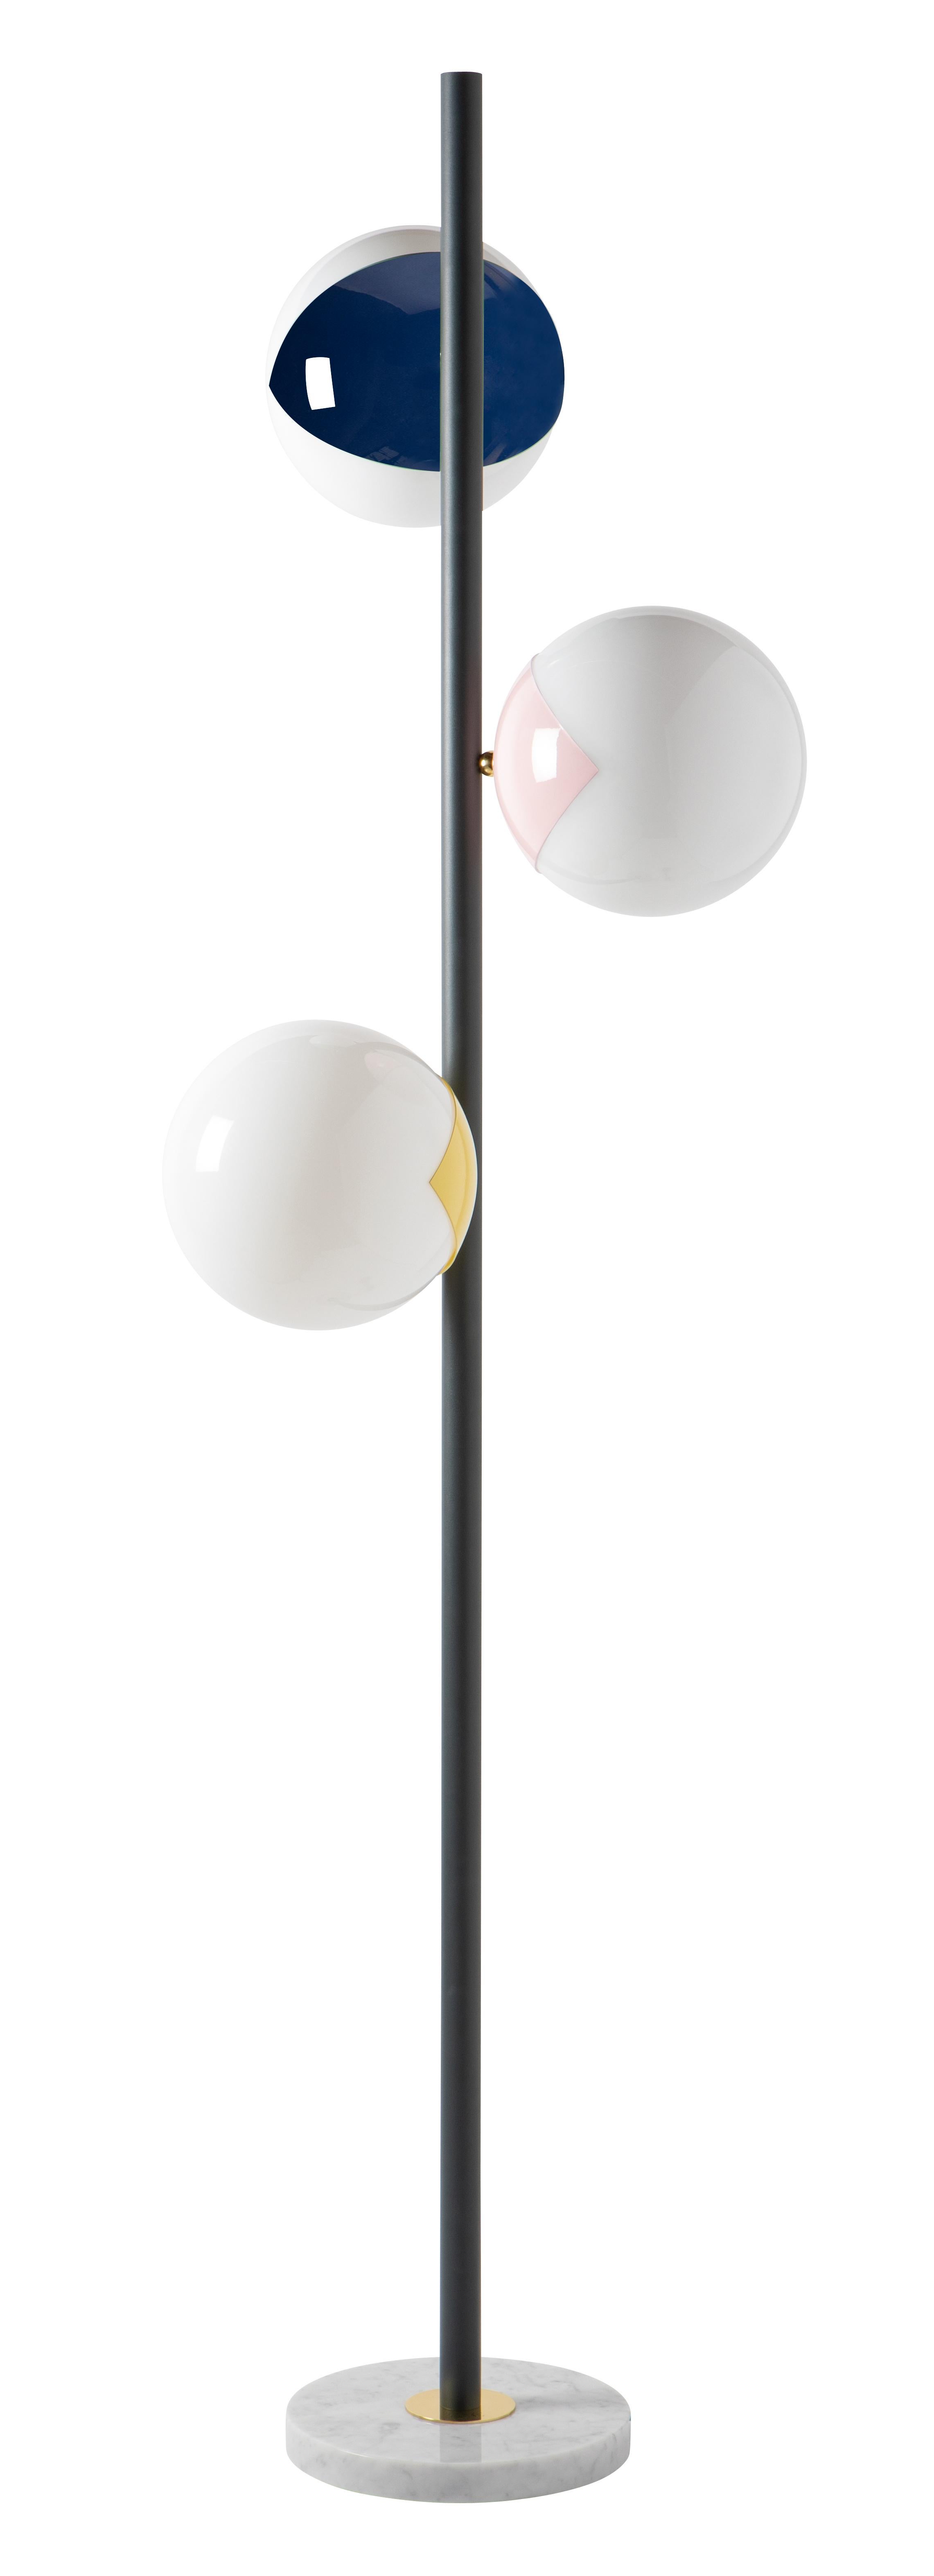 Pop up floor lamp by Magic Circus Editions
Dimensions: W 170 x H 51 cm
 diam sphere 22 cm
Materials: Carrara marble base, smooth brass tube, glossy mouth blown glass

Available finishes: Matte black tube and brass, matte black tube and